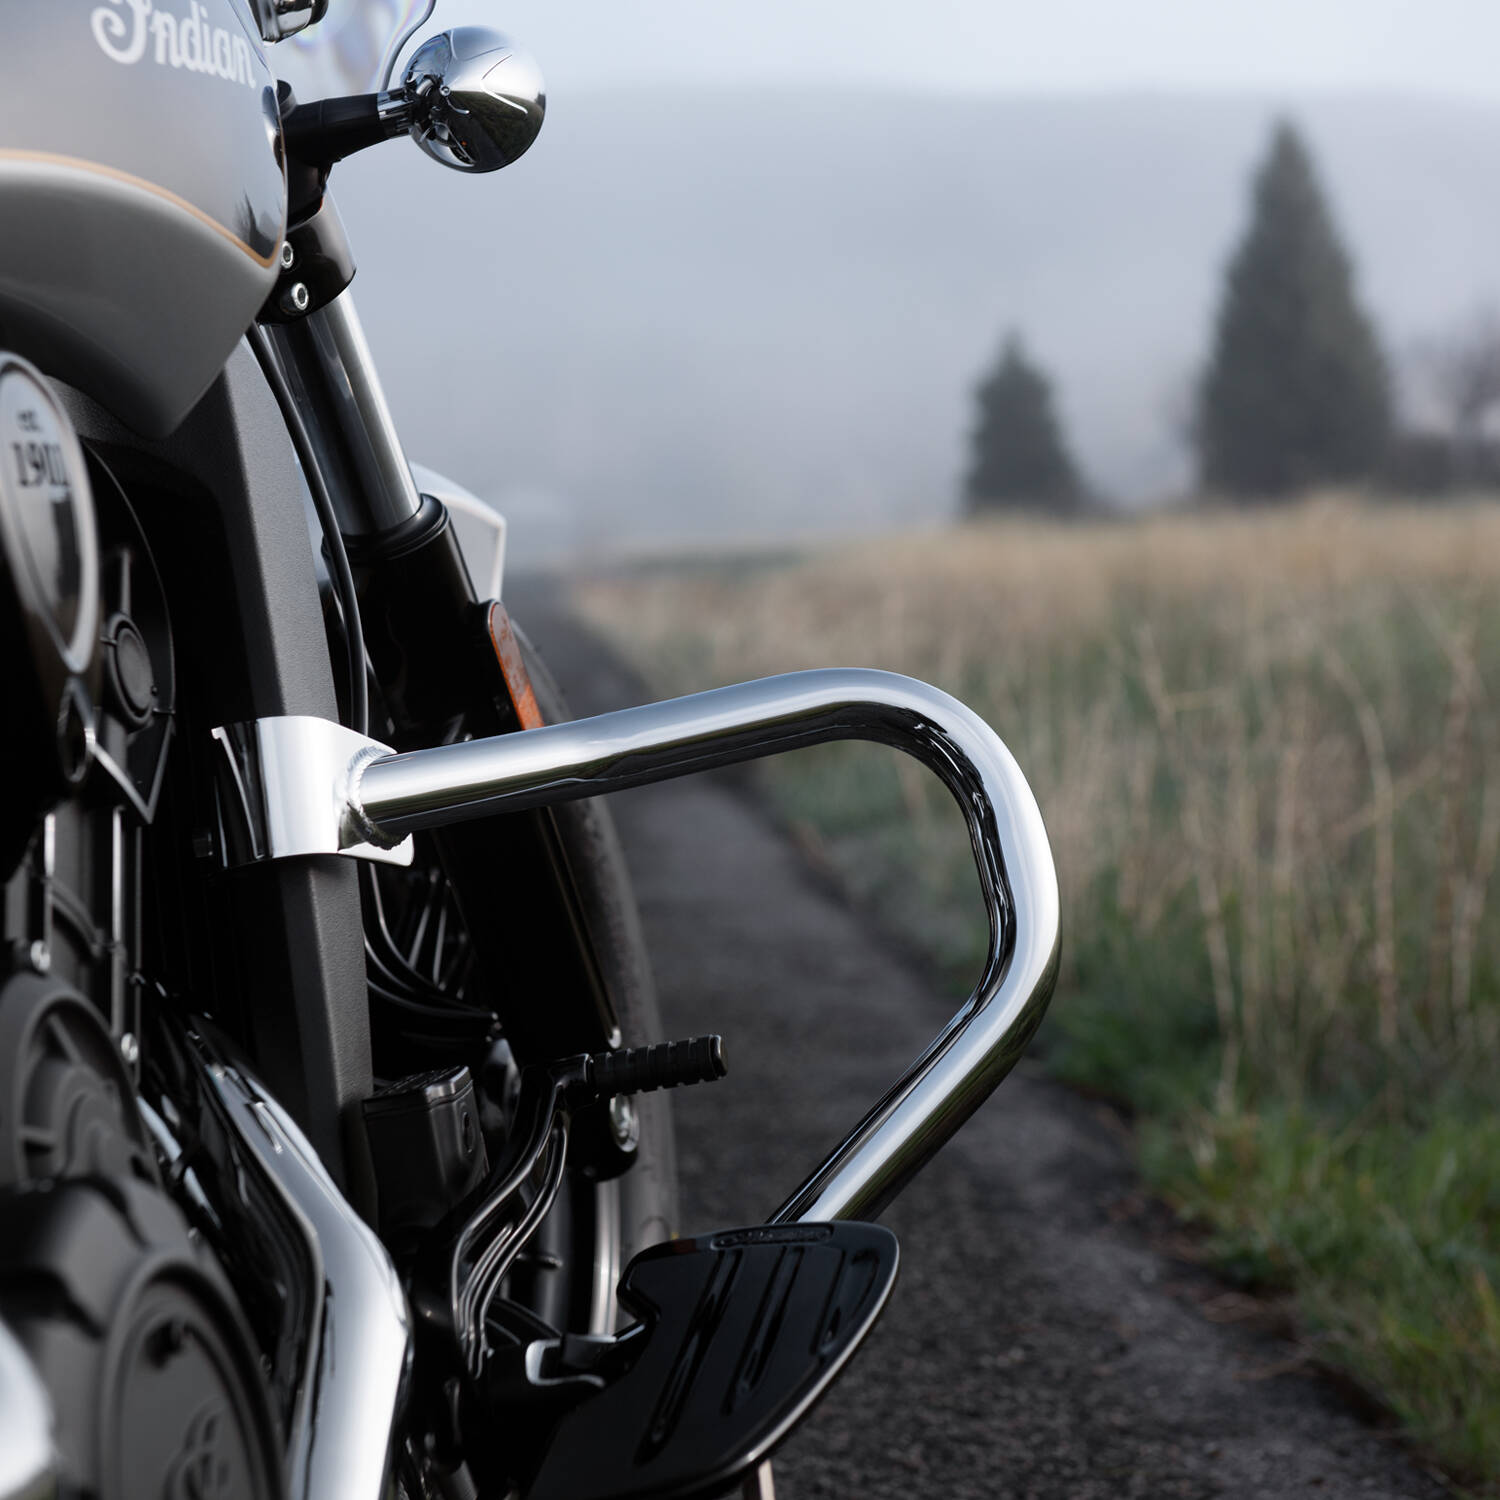 Steel Front Highway Bars in Chrome, Pair